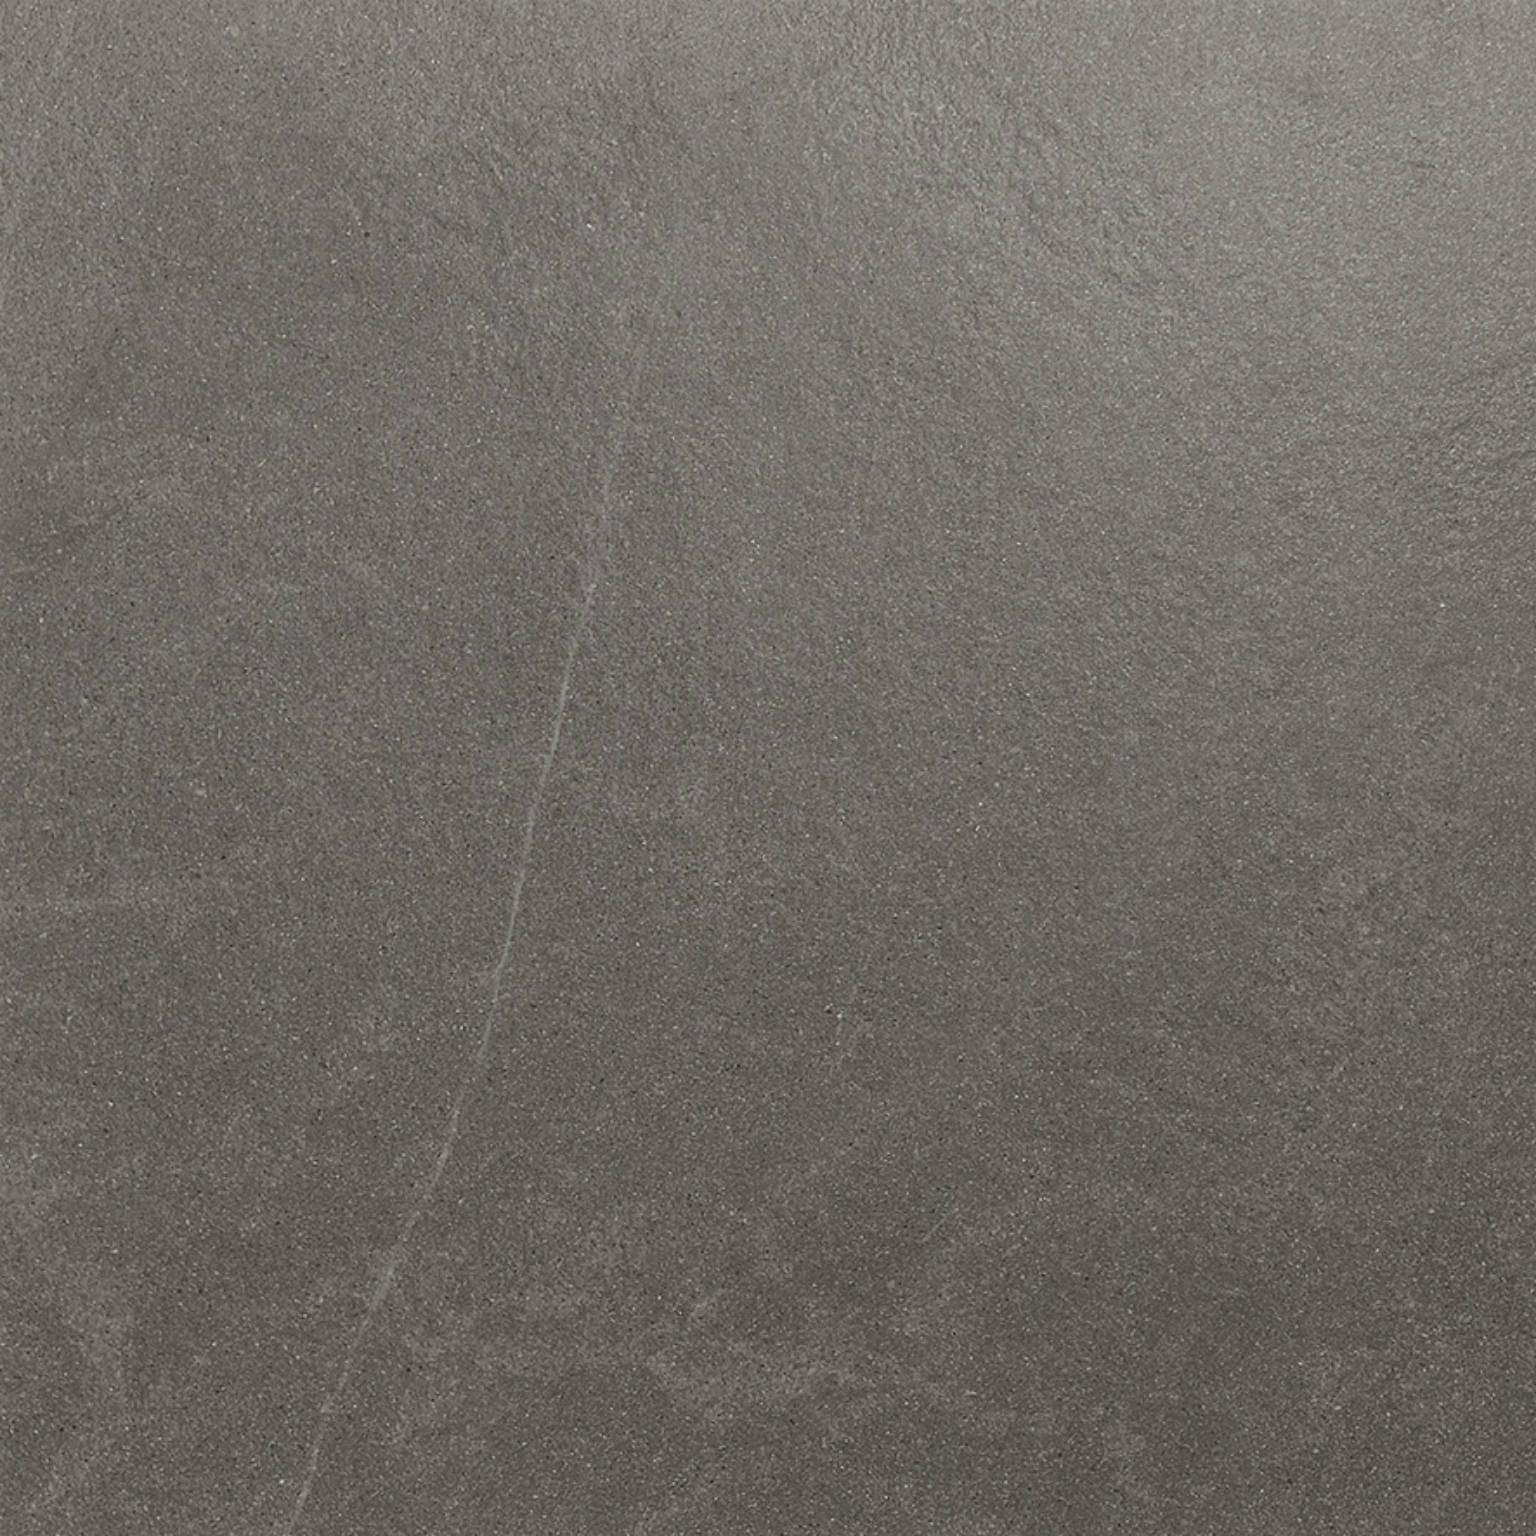 Contact Charcoal 60x60 | Newker